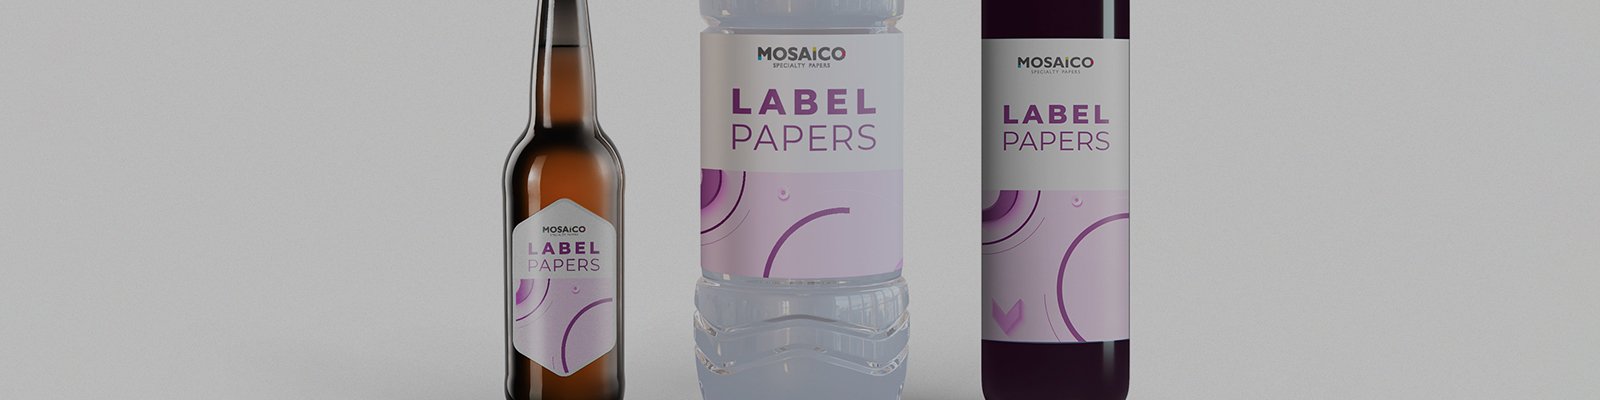 Label Papers